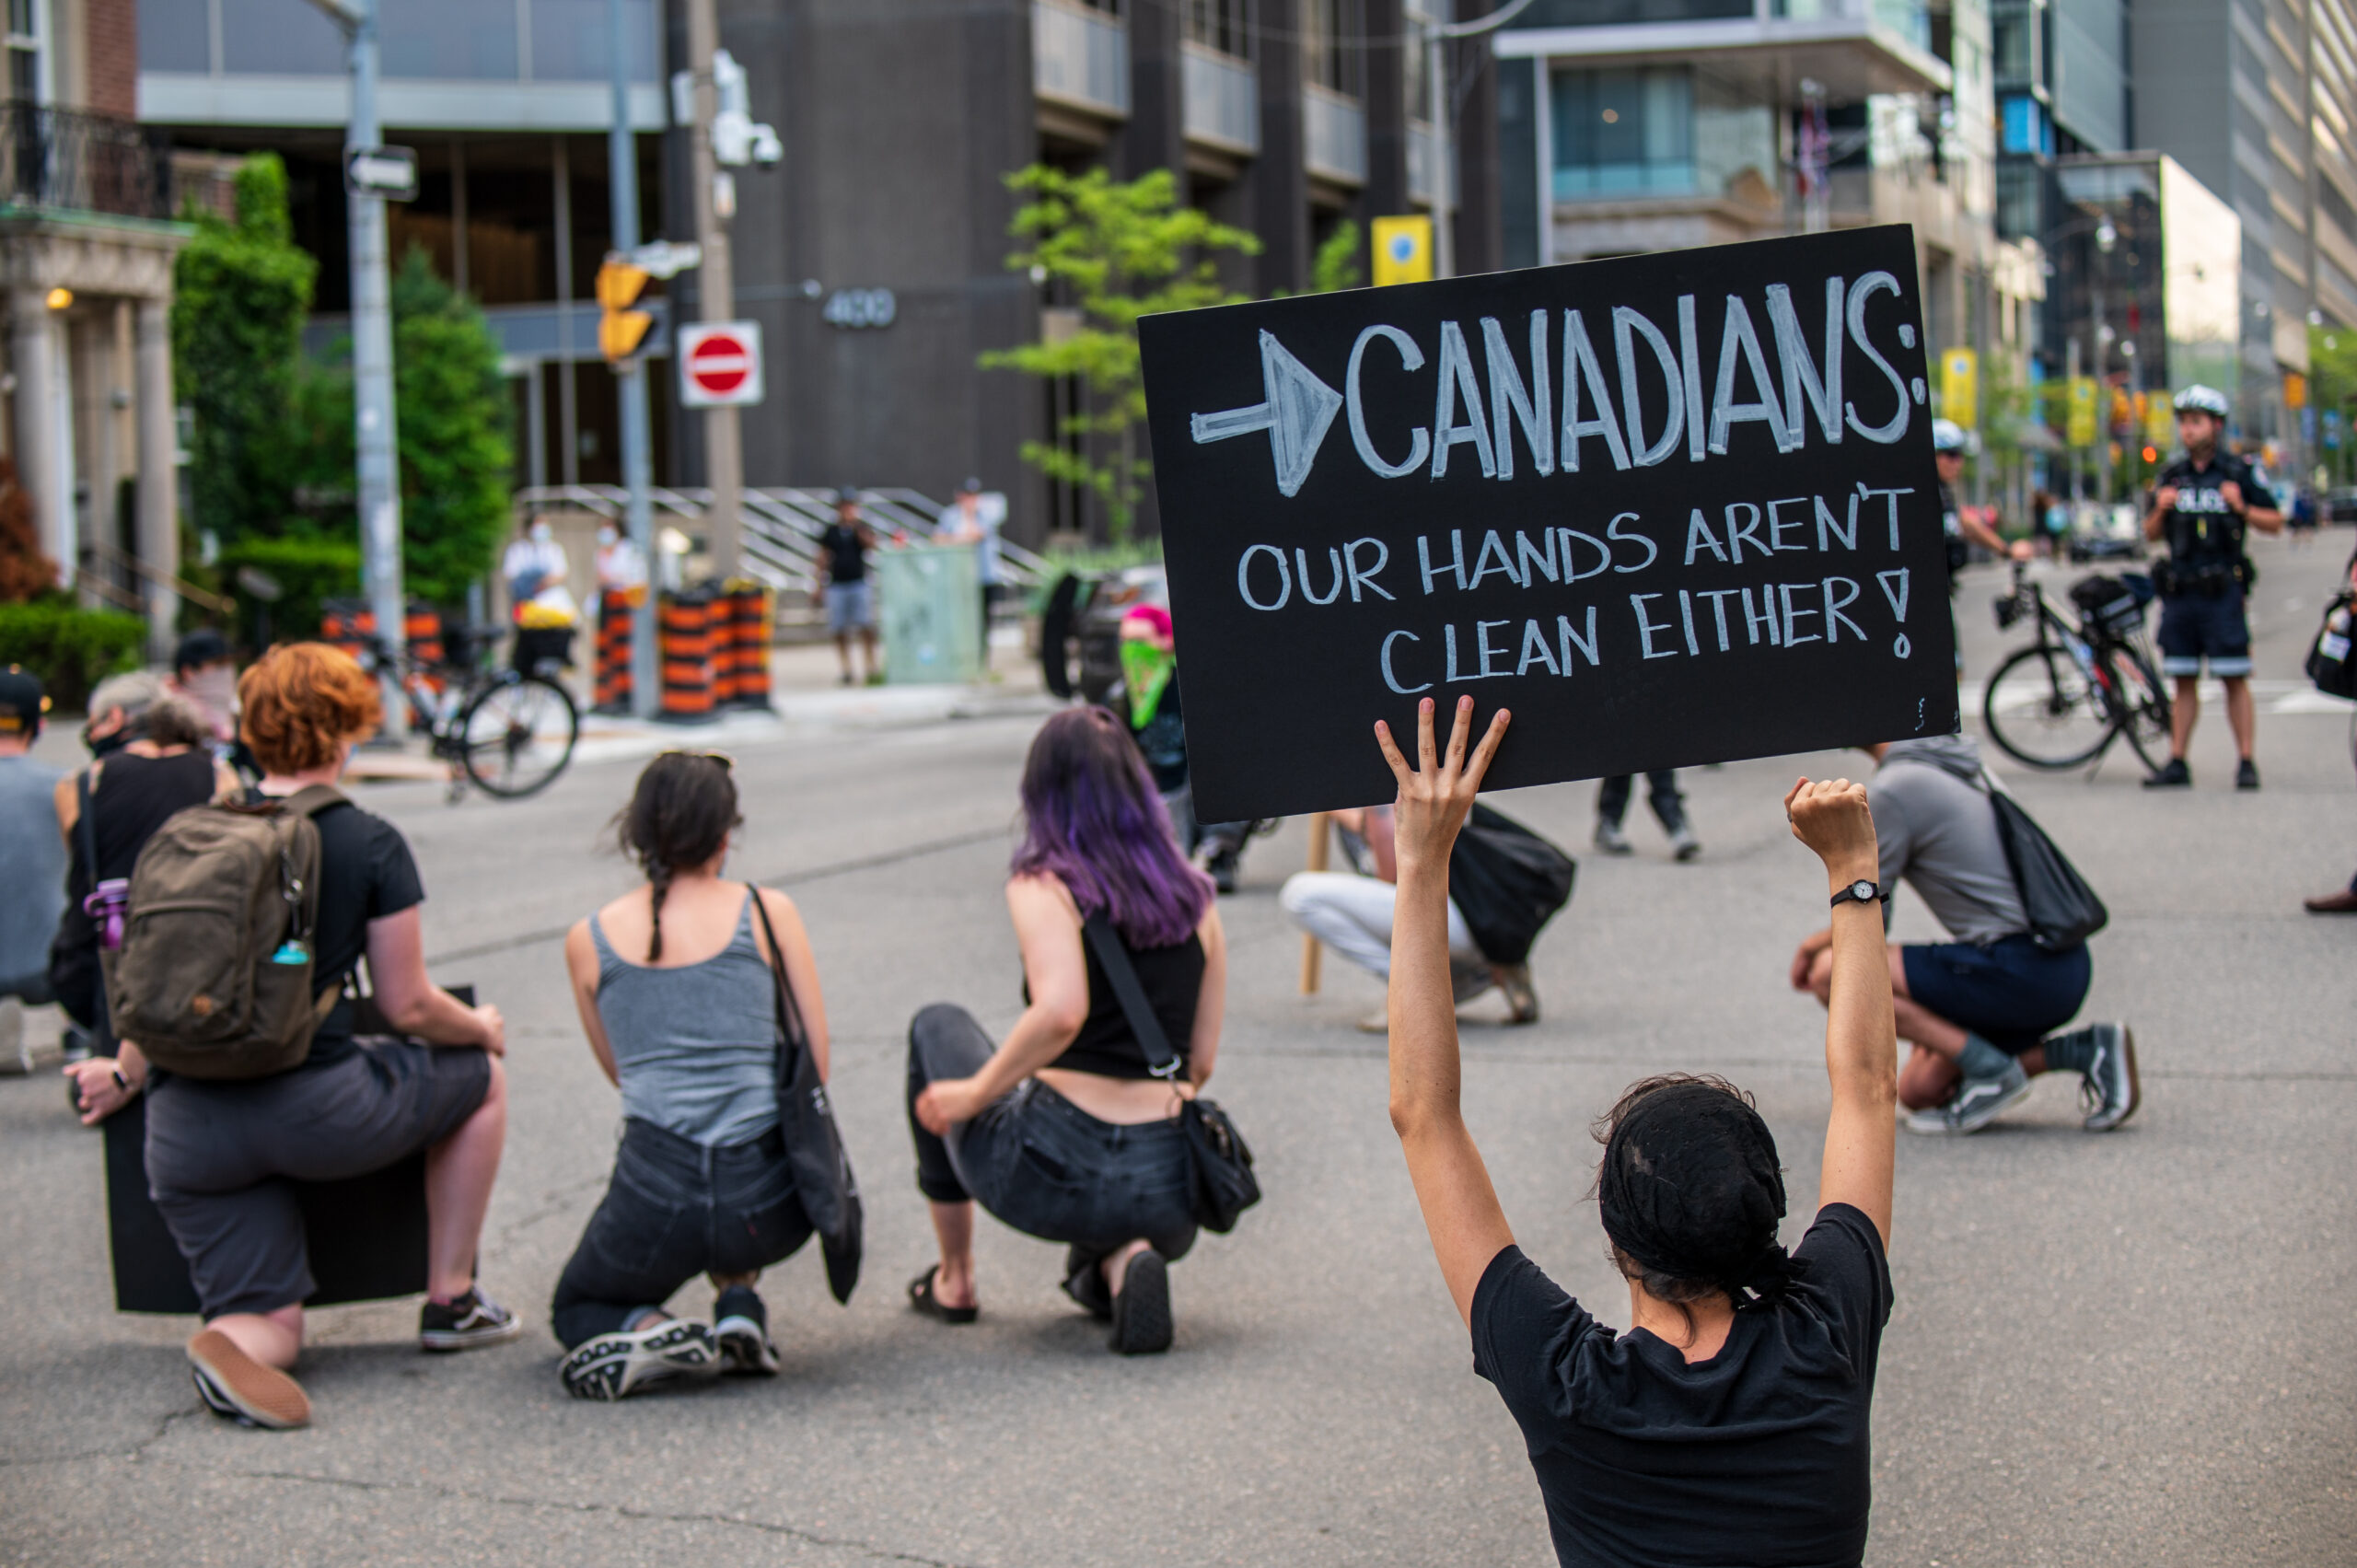 Protests in the wake of the police murder of George Floyd in Minneapolis have not been limited to the United States. This protest outside the U.S. consulate in Toronto had a message for Canadians.